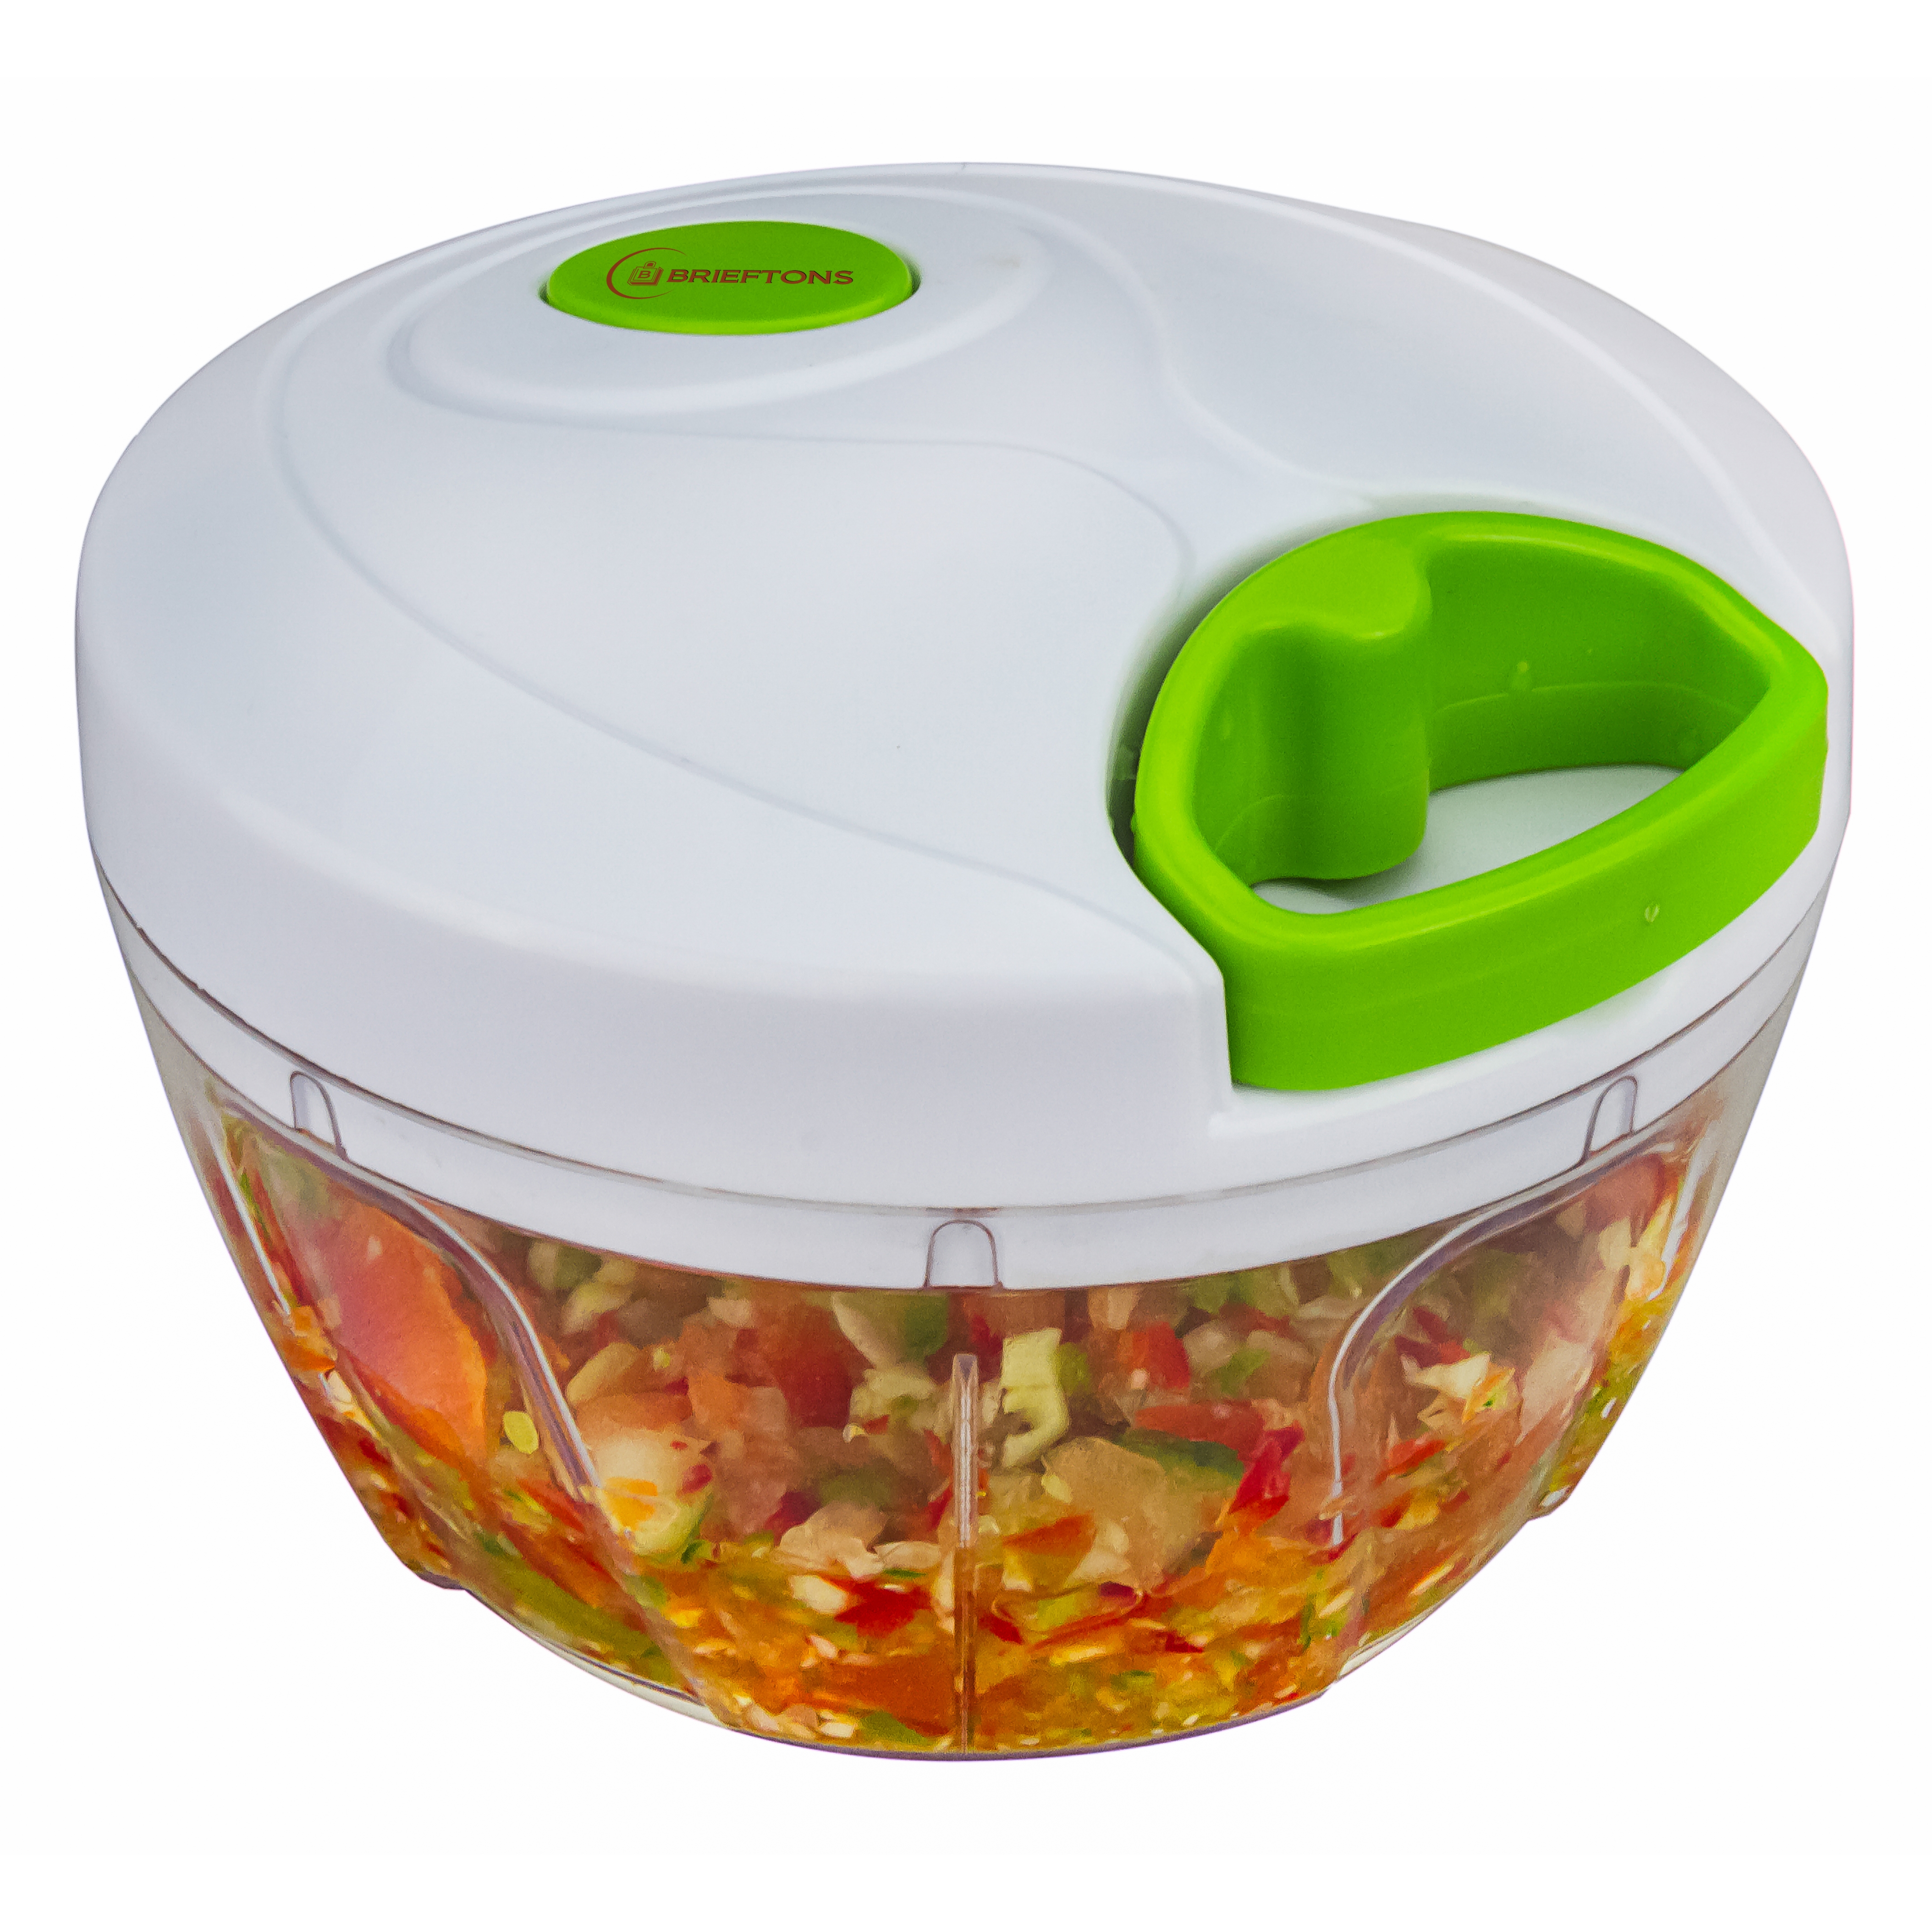 Brieftons QuickPush Food Chopper (Model: BR-QP-02) - How to Use